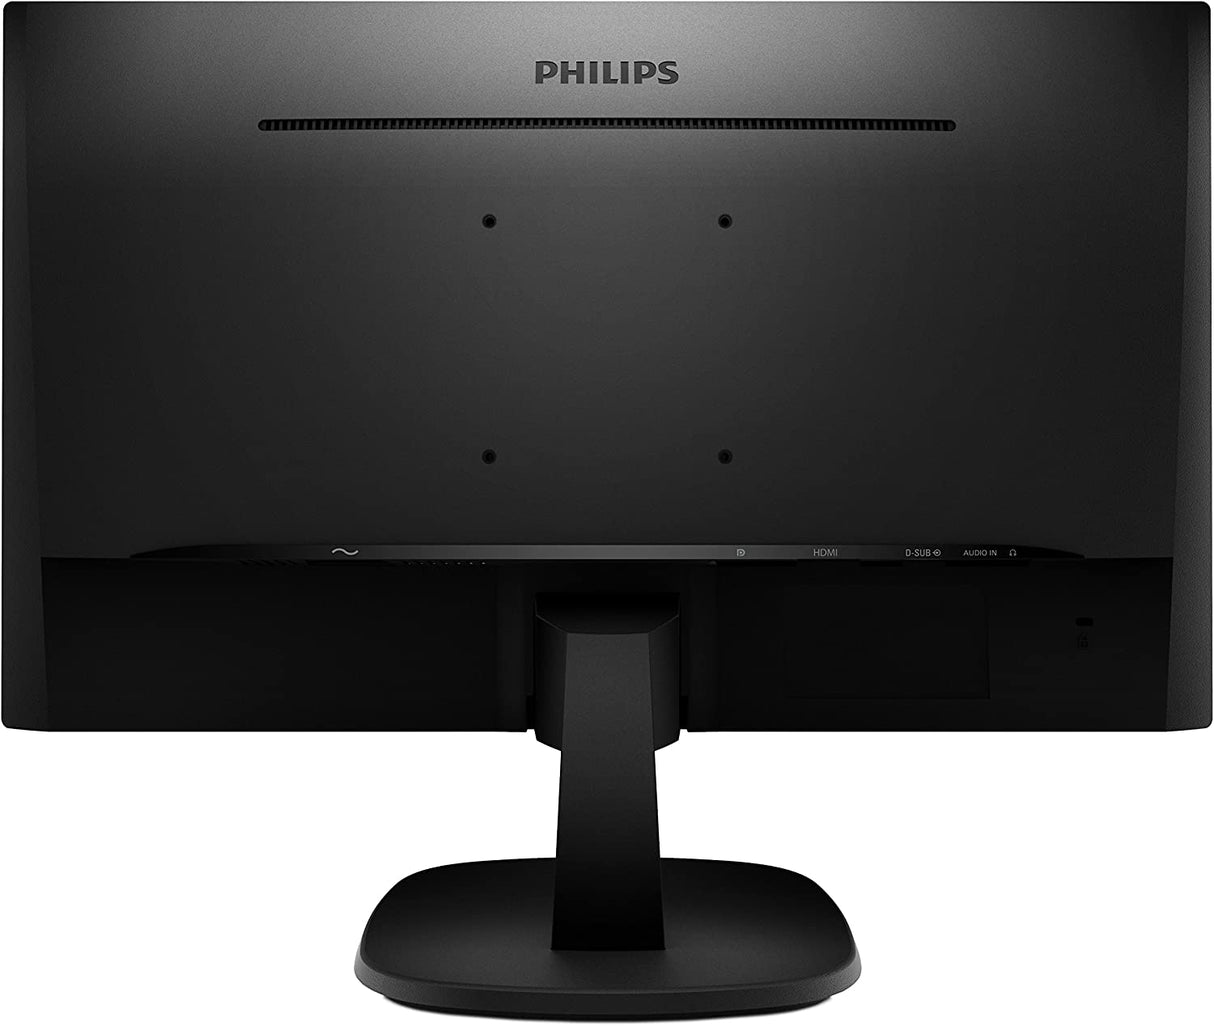 Philips 273V7QJAB 27" Frameless Monitor, Full HD 1920x1080, IPS, Built-in Speakers, VESA, 4Yr Advance Replacement Warranty